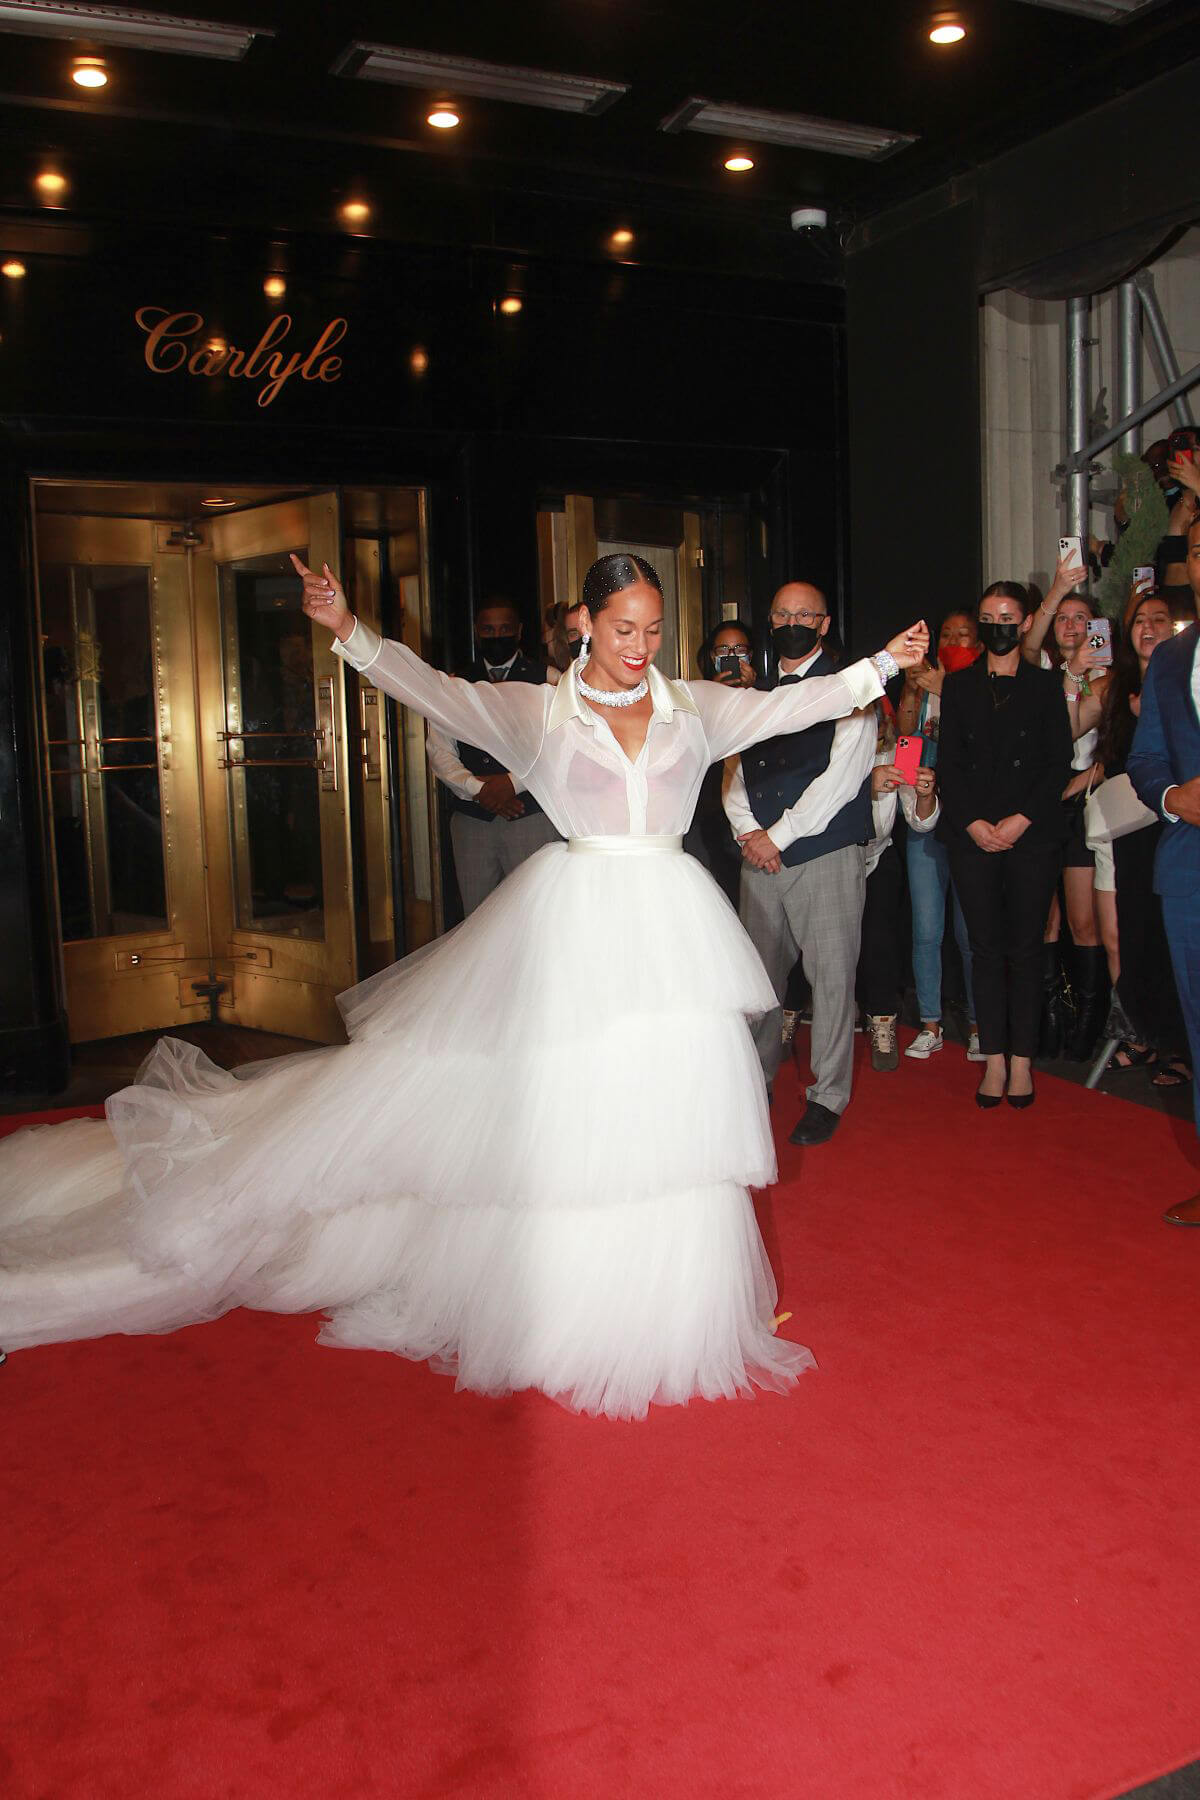 Alicia Keys Wears White Gown While Heading to Met Gala 2021 in New York 09/13/2021